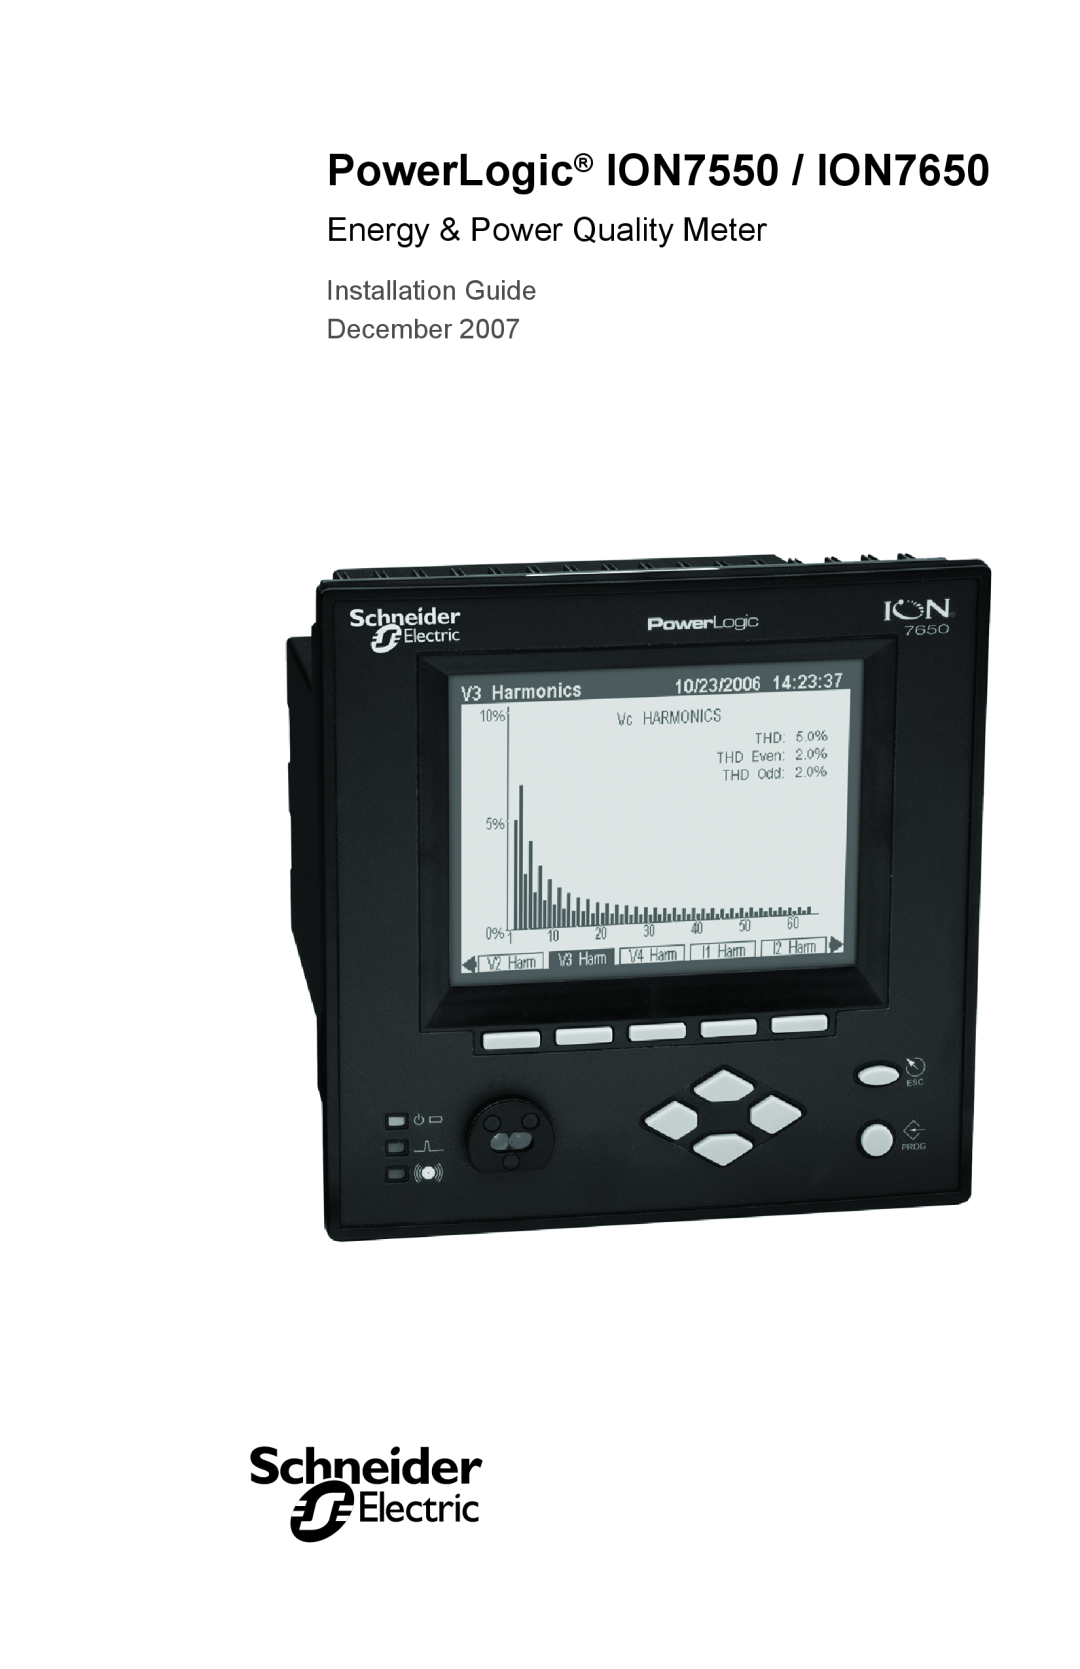 Schneider Electric manual Energy & Power Quality Meter, PowerLogic ION7550 / ION7650, Installation Guide December 